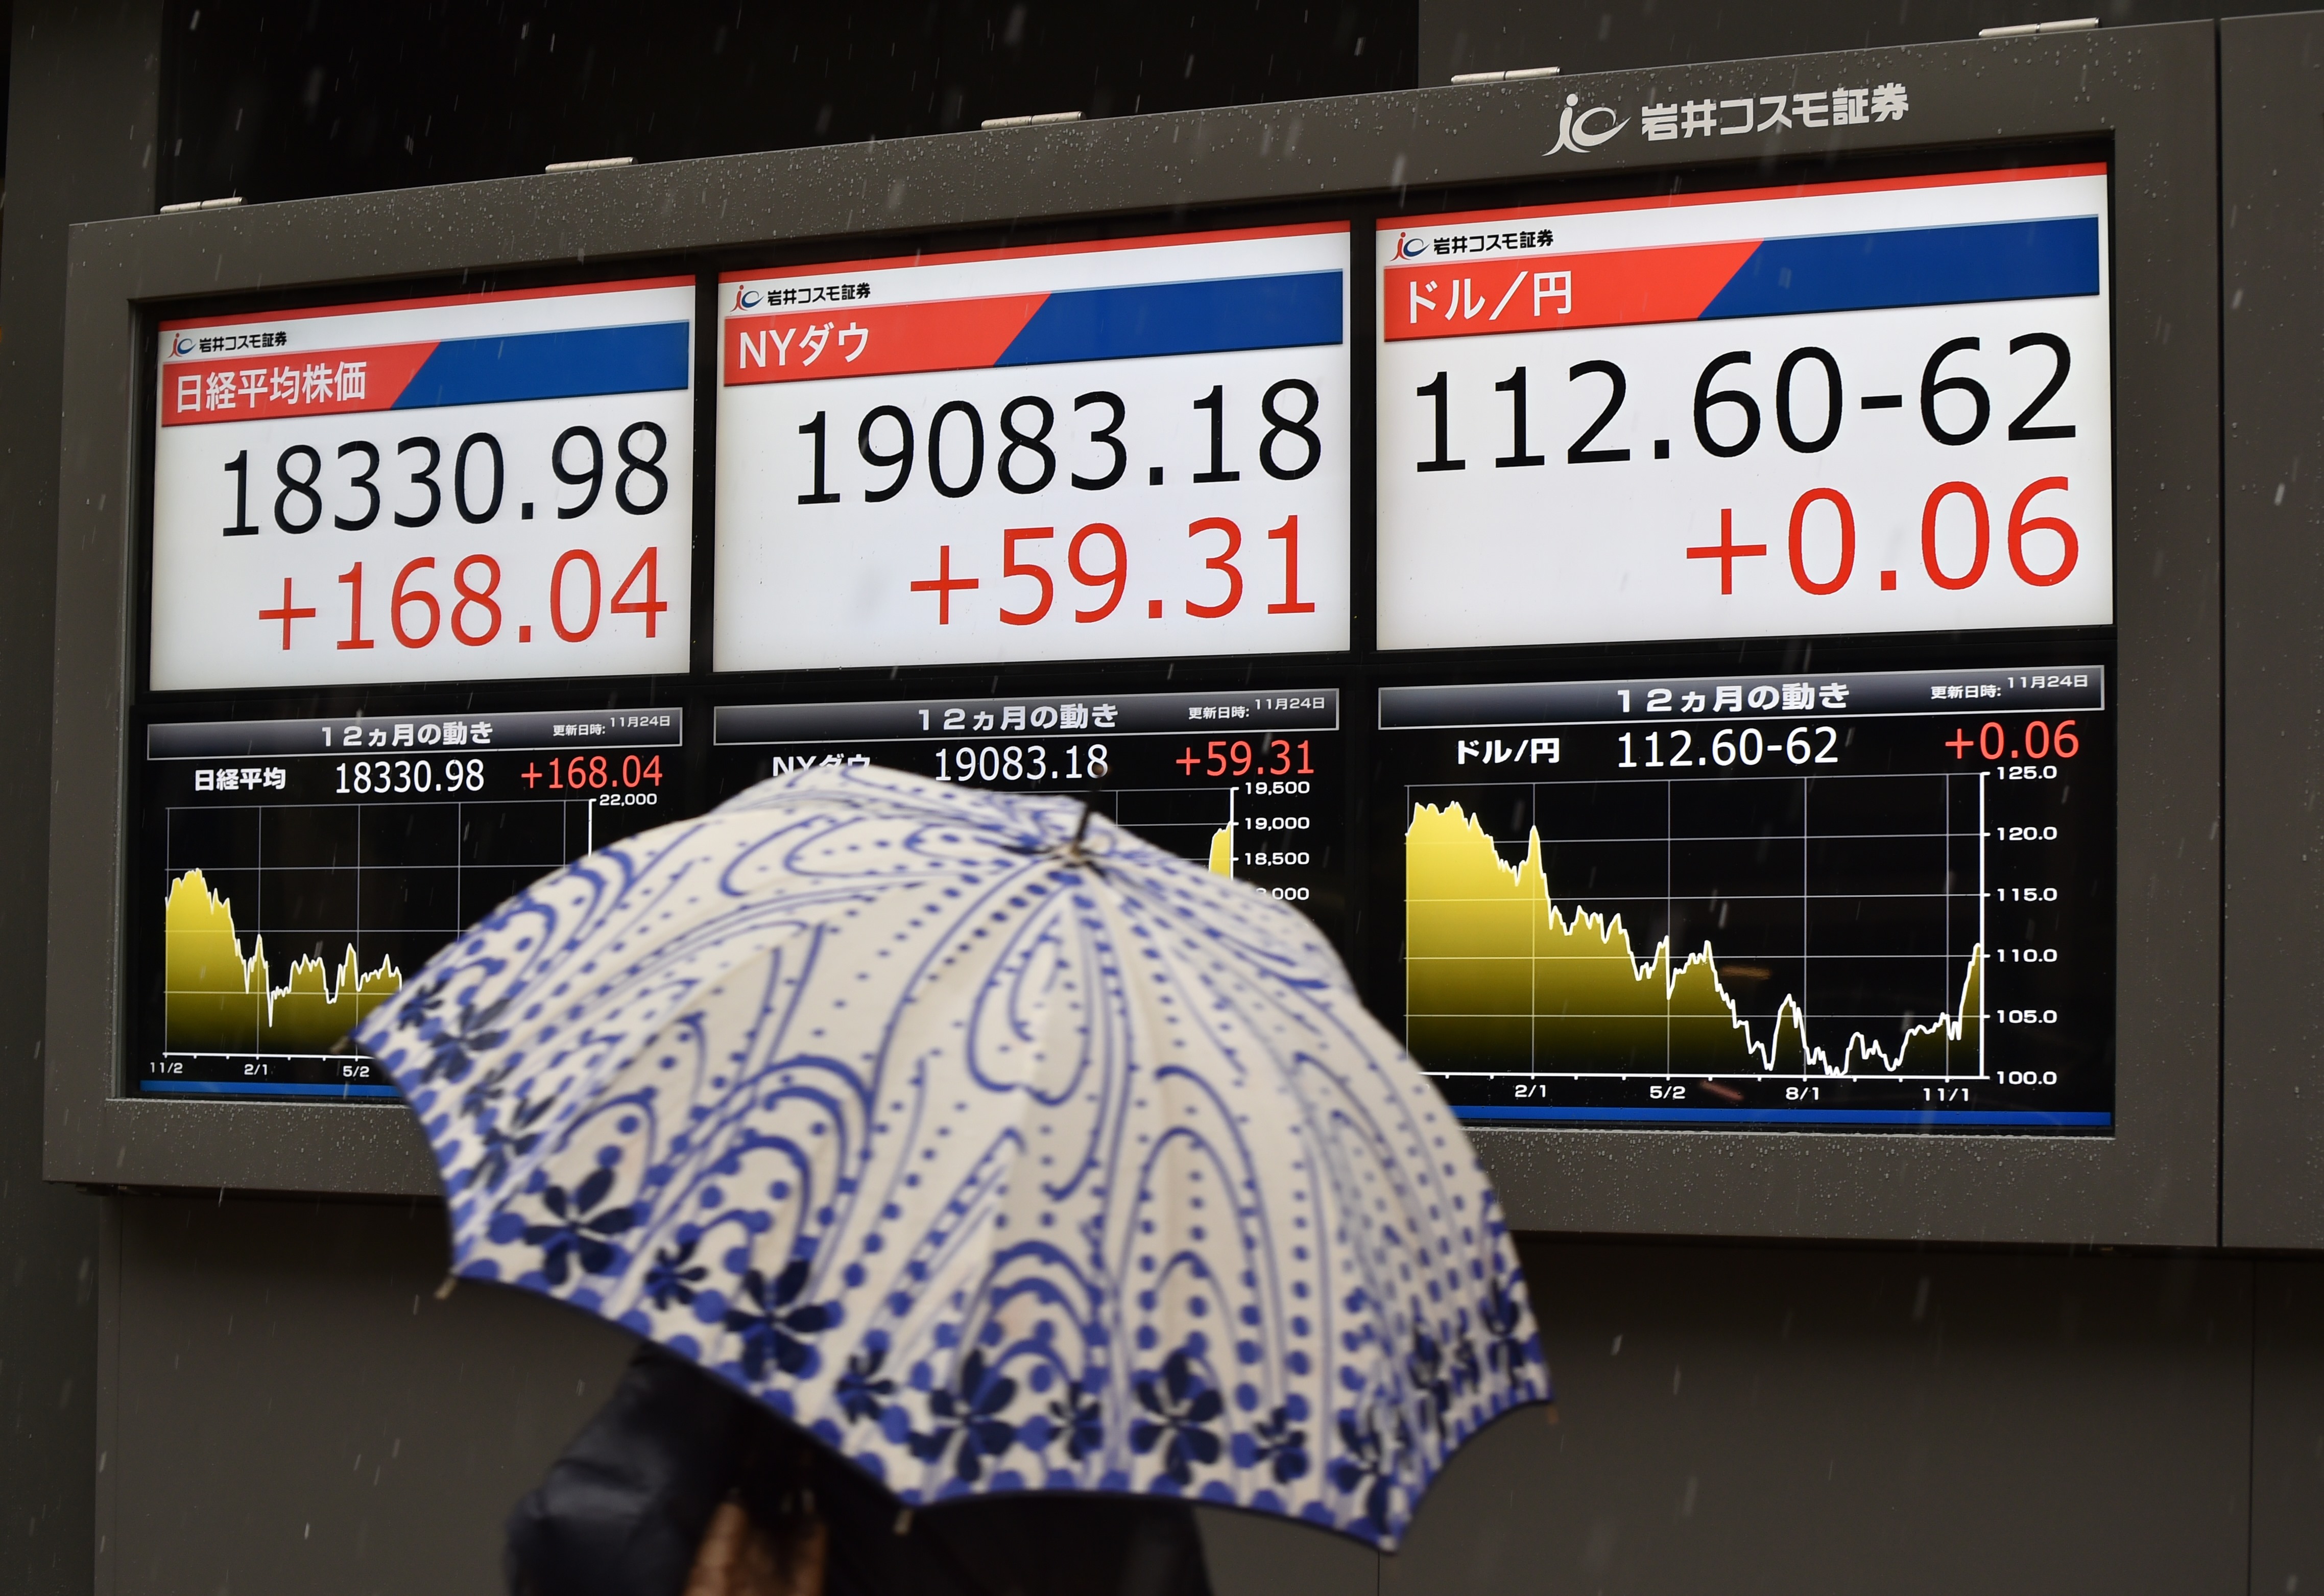 A pedestrian walks past an electric quotation board displaying share prices of the Tokyo Stock Exchange (L) and the current exchange rate of the Japanese yen against the US dollar (R) in Tokyo on November 24, 2016. Tokyo stocks opened higher on November 24 with investor sentiment boosted by the yen's drop to seven-month lows against the dollar. / AFP PHOTO / KAZUHIRO NOGI